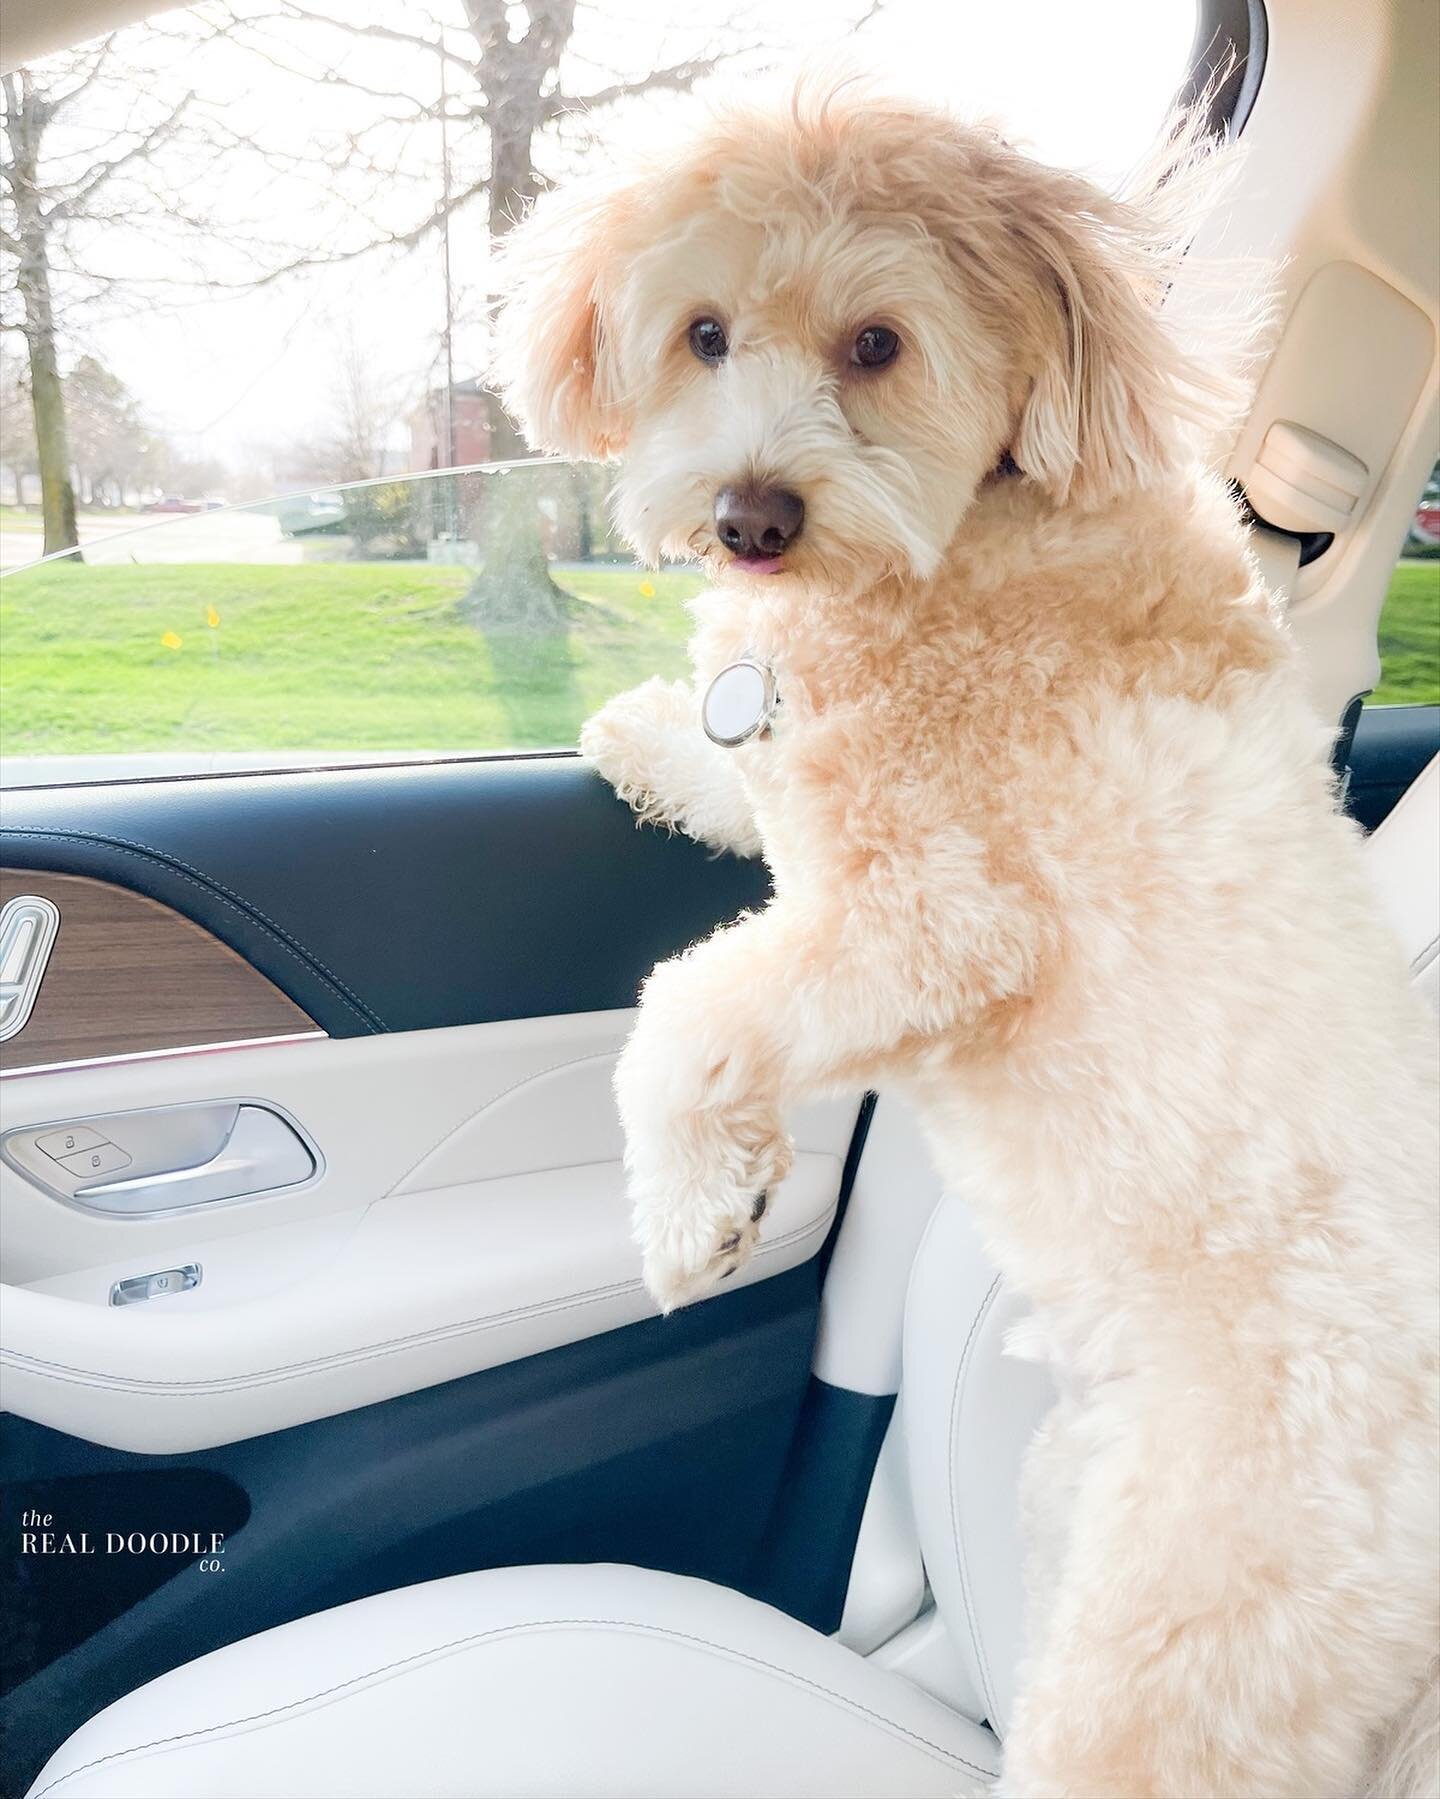 &ldquo;Get in, we&rsquo;re going to the dog park.&rdquo; 
.
.
.
.
.
#pomapoo #pomapoosofinstagram #dog #dogsofinstagram #car #ride #teddy #therealdoodleco #puppy #spring #love #picoftheday